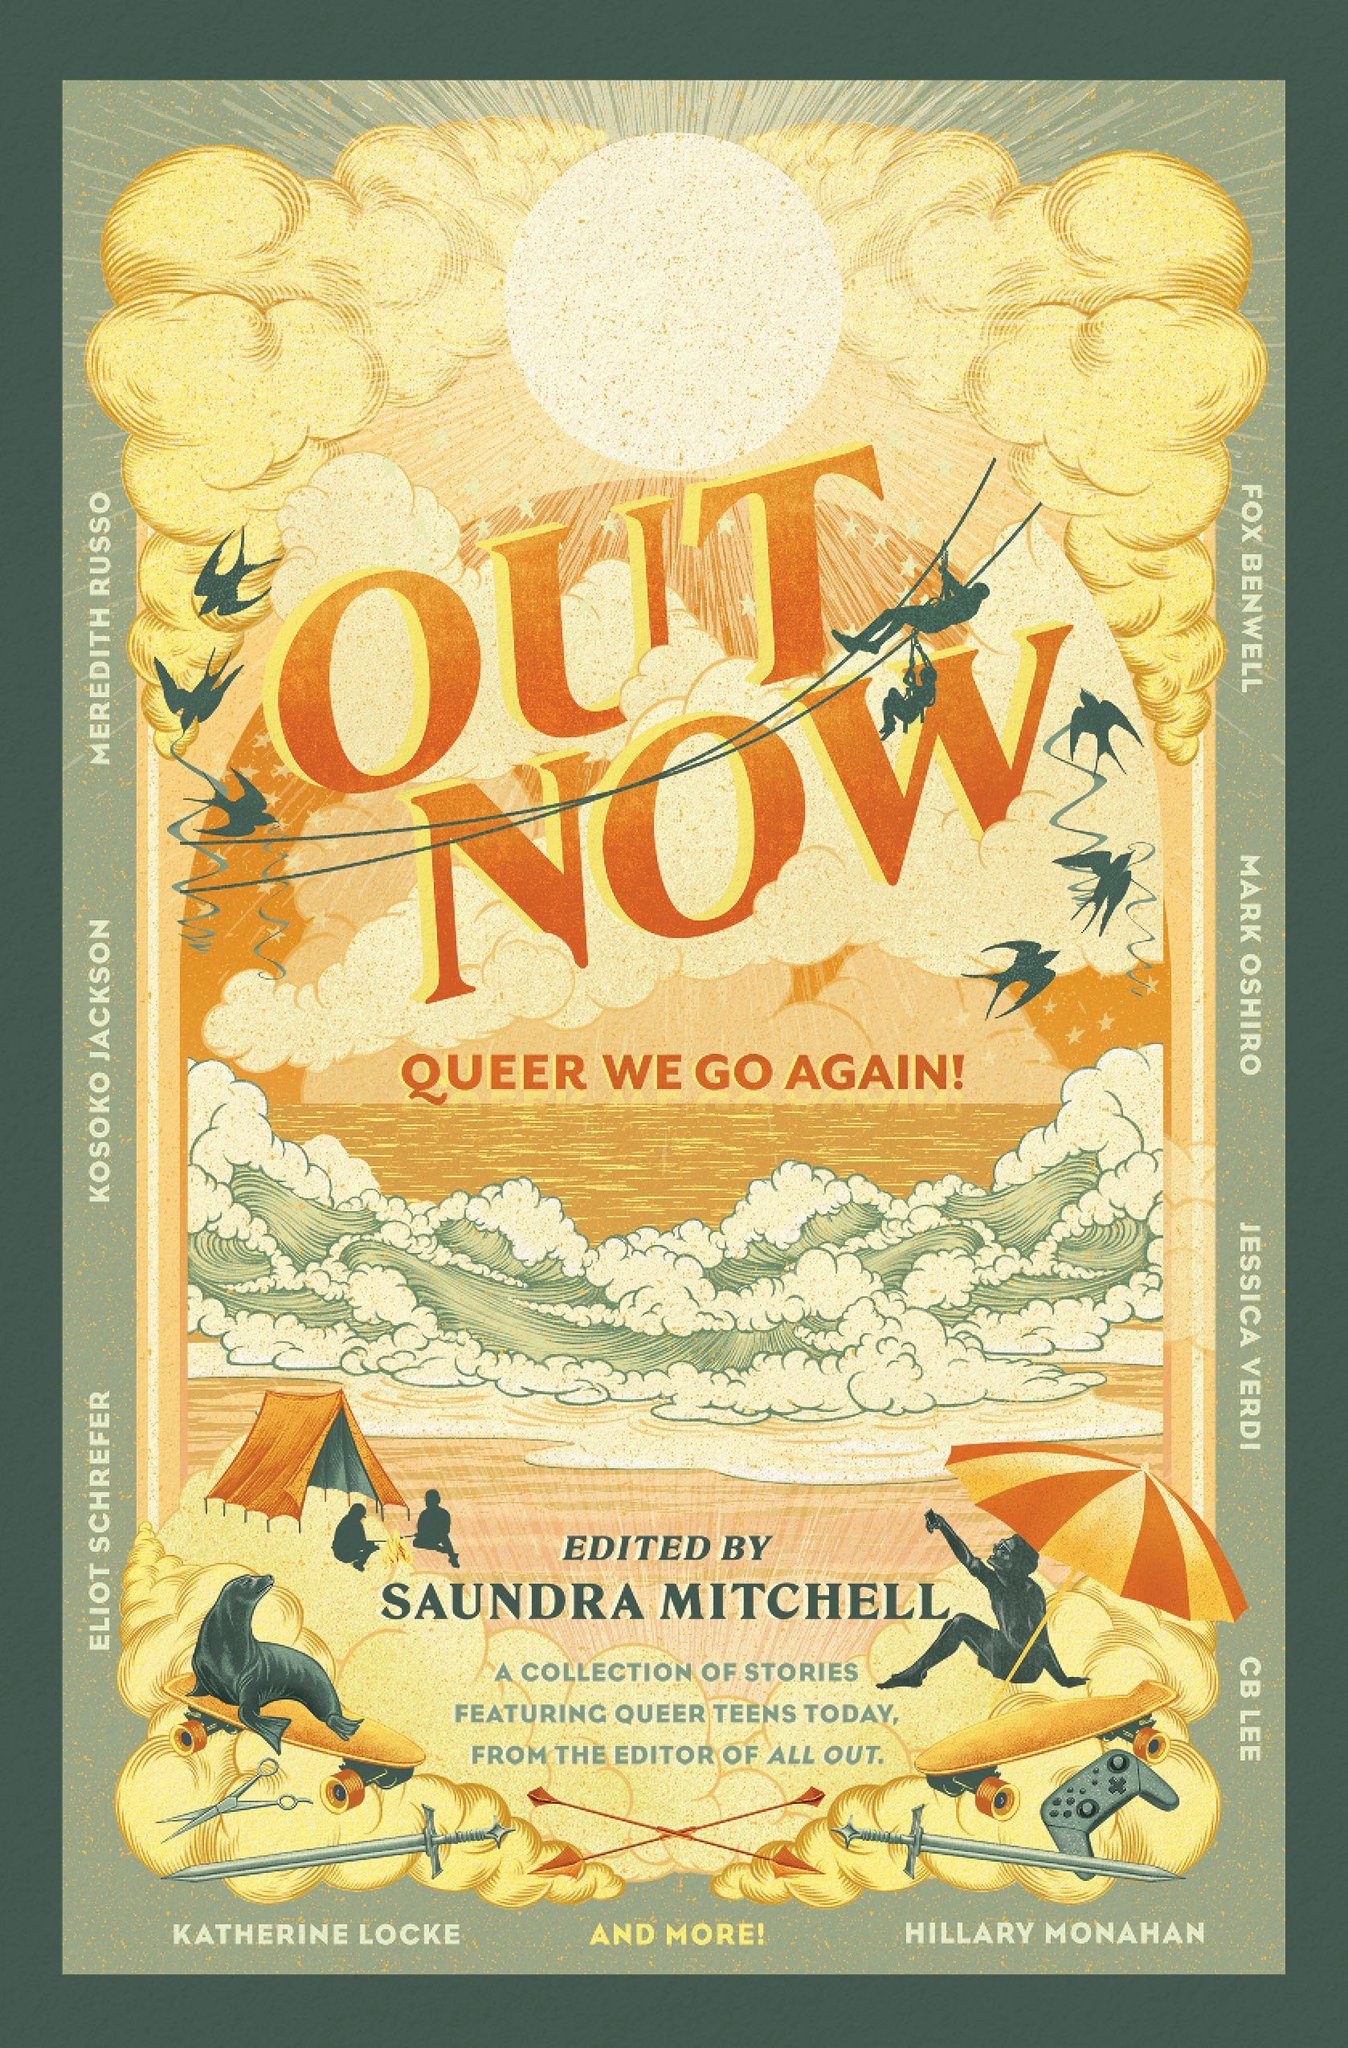 Saundra Mitchell - Out Now: Queer We Go Again! Release Date? 2020 YA LGBT Anthologies & Short Stories